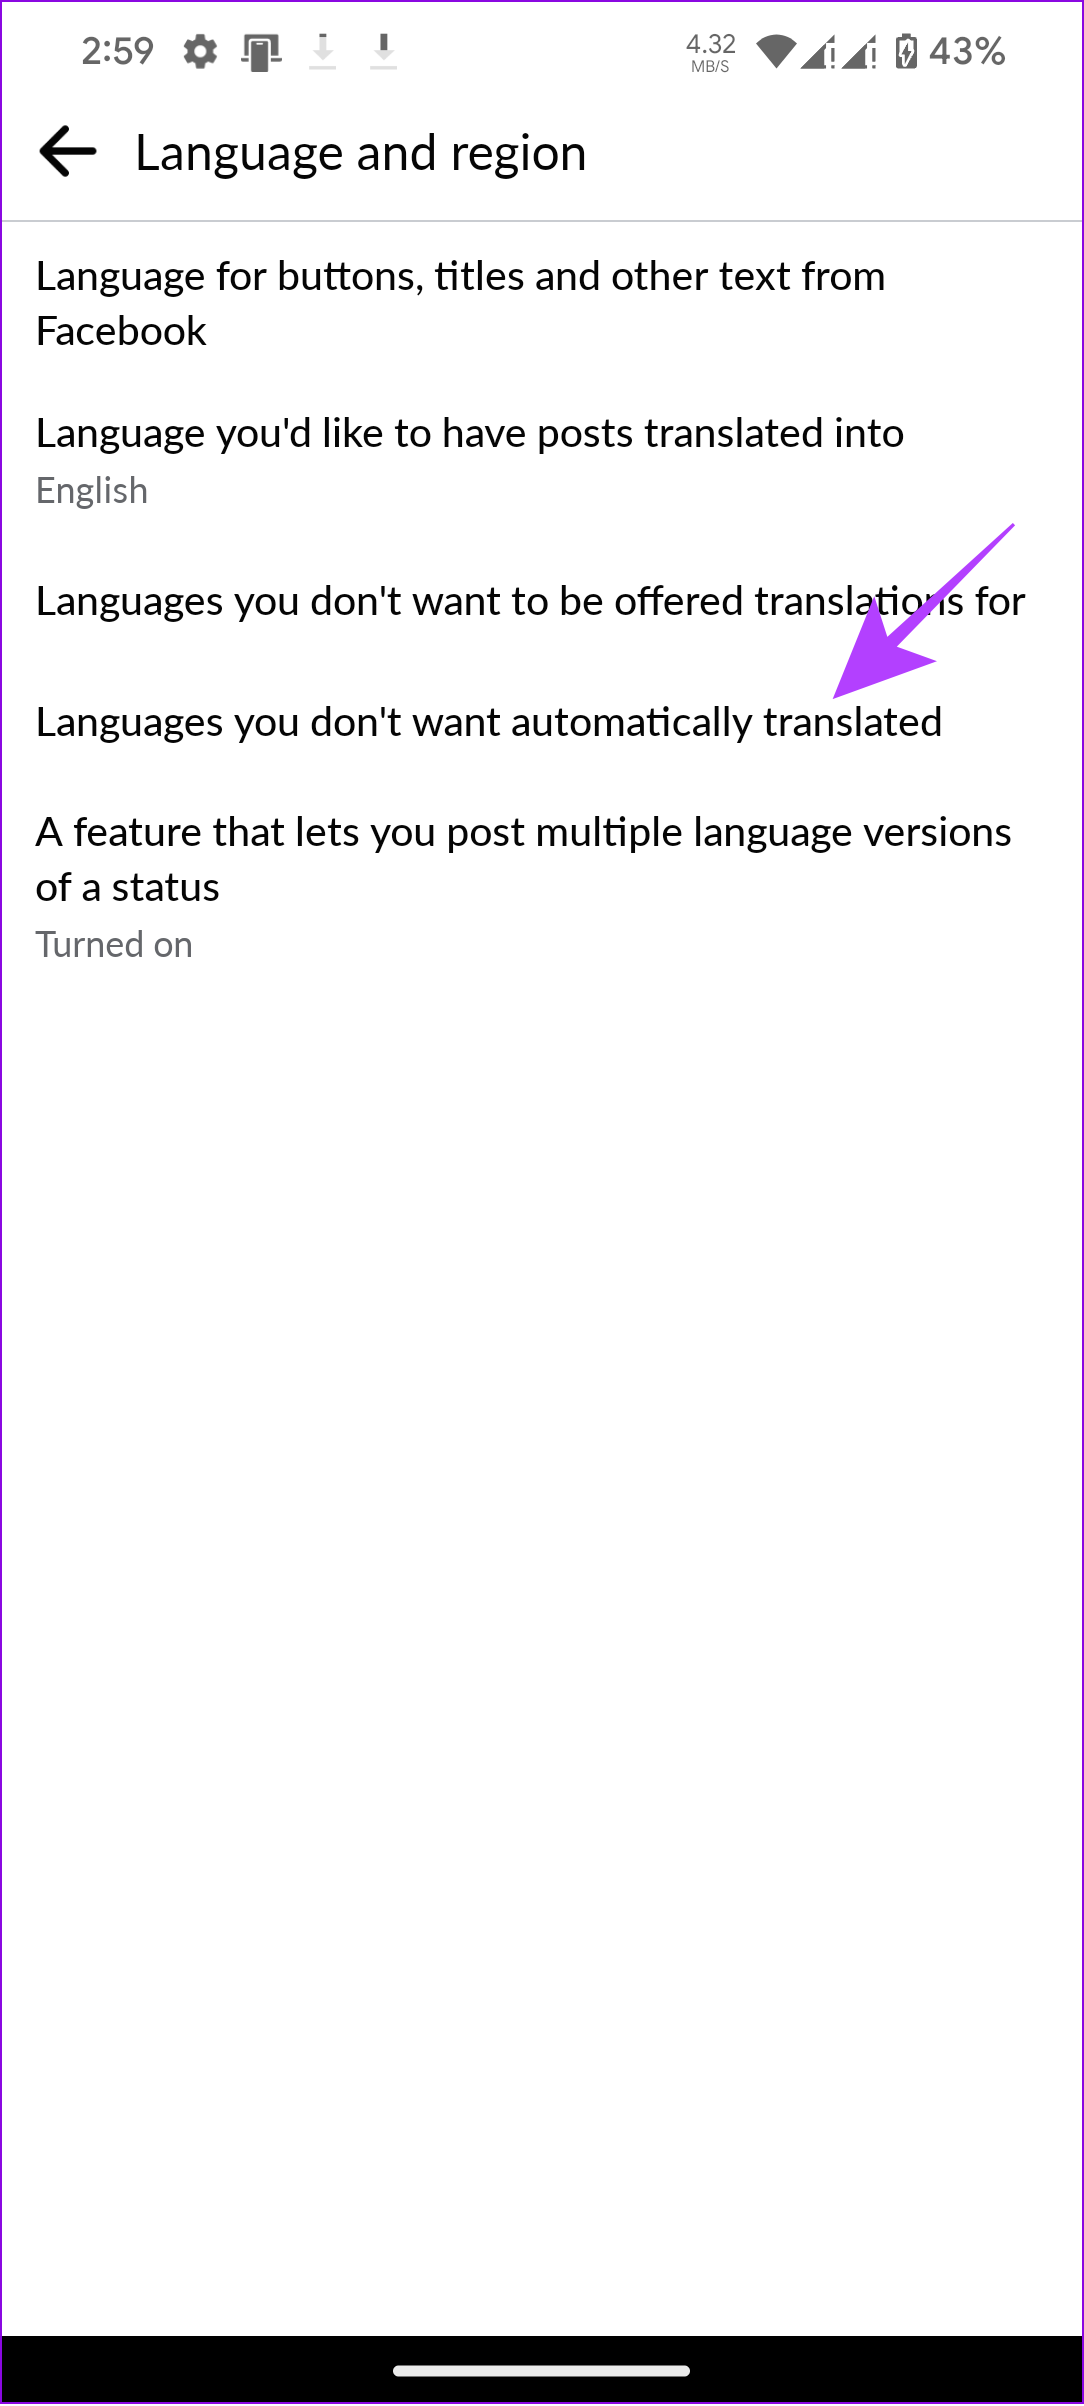 choose languages you don't want automatically translated